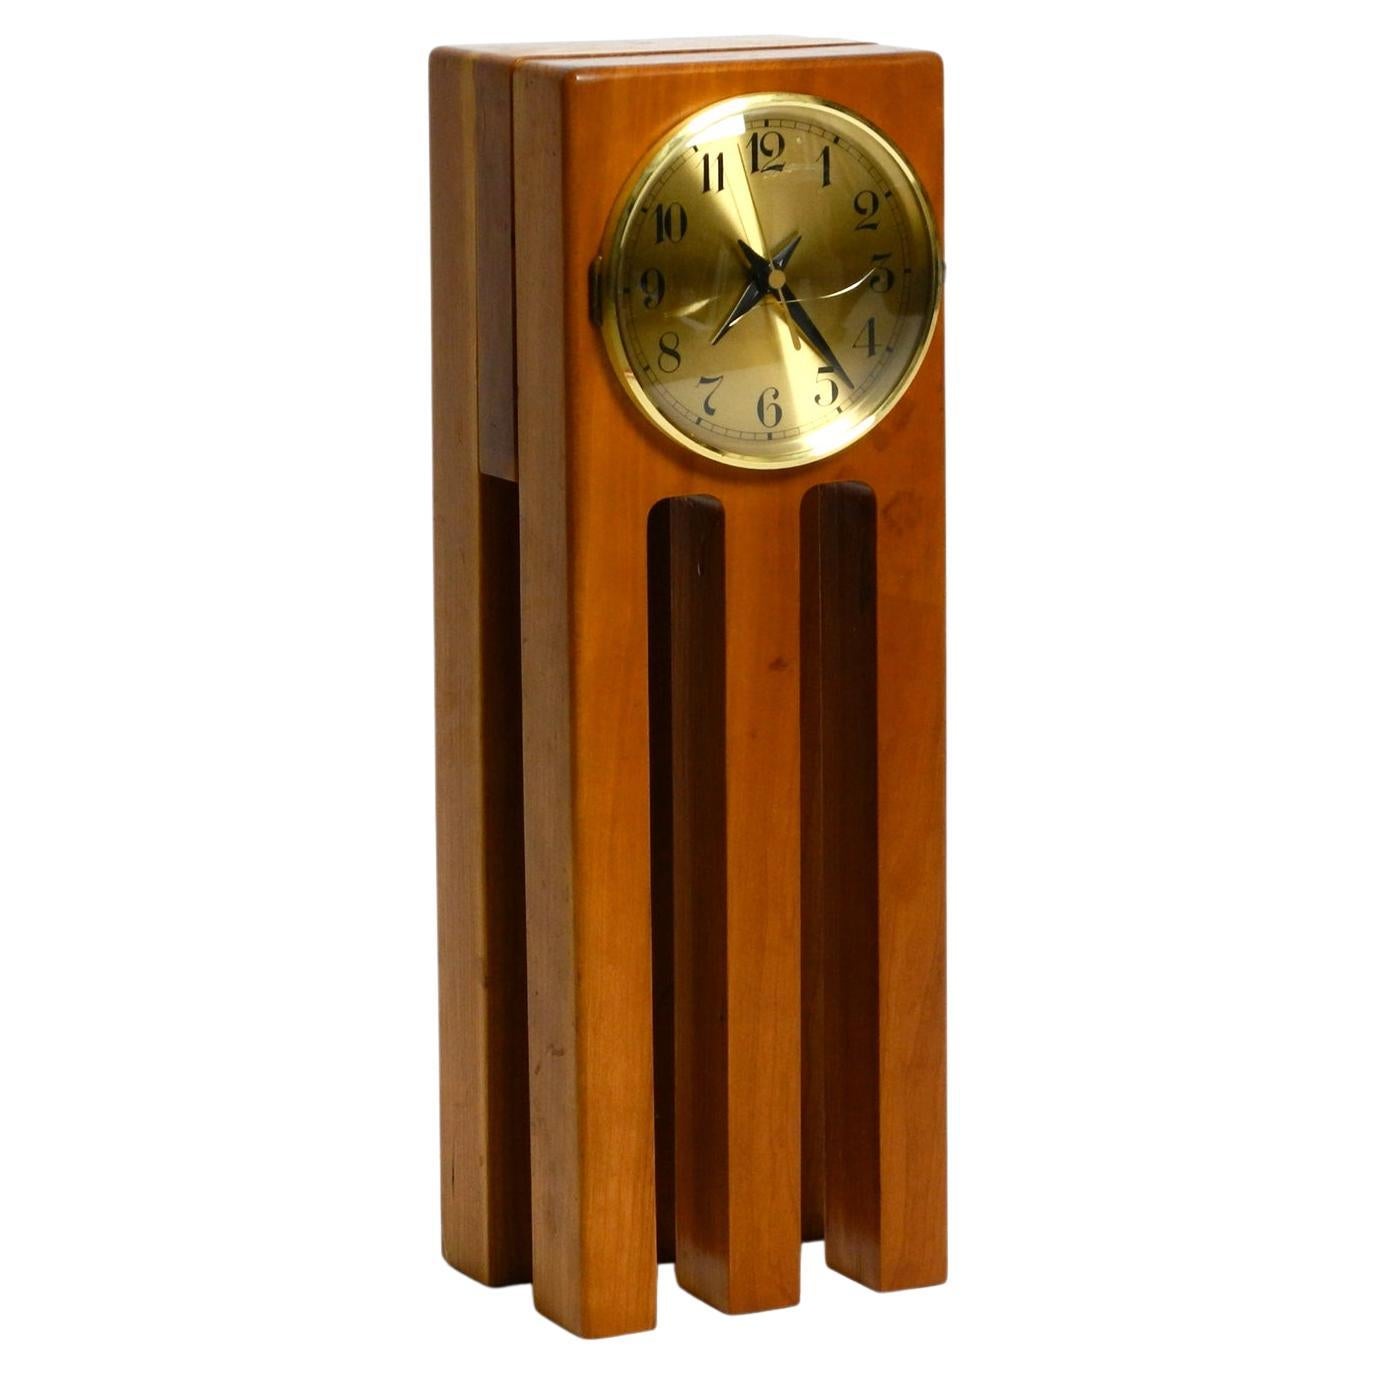 Large, Unusual 1980s Postmodern Design Table Clock Made of Cherry Wood For Sale